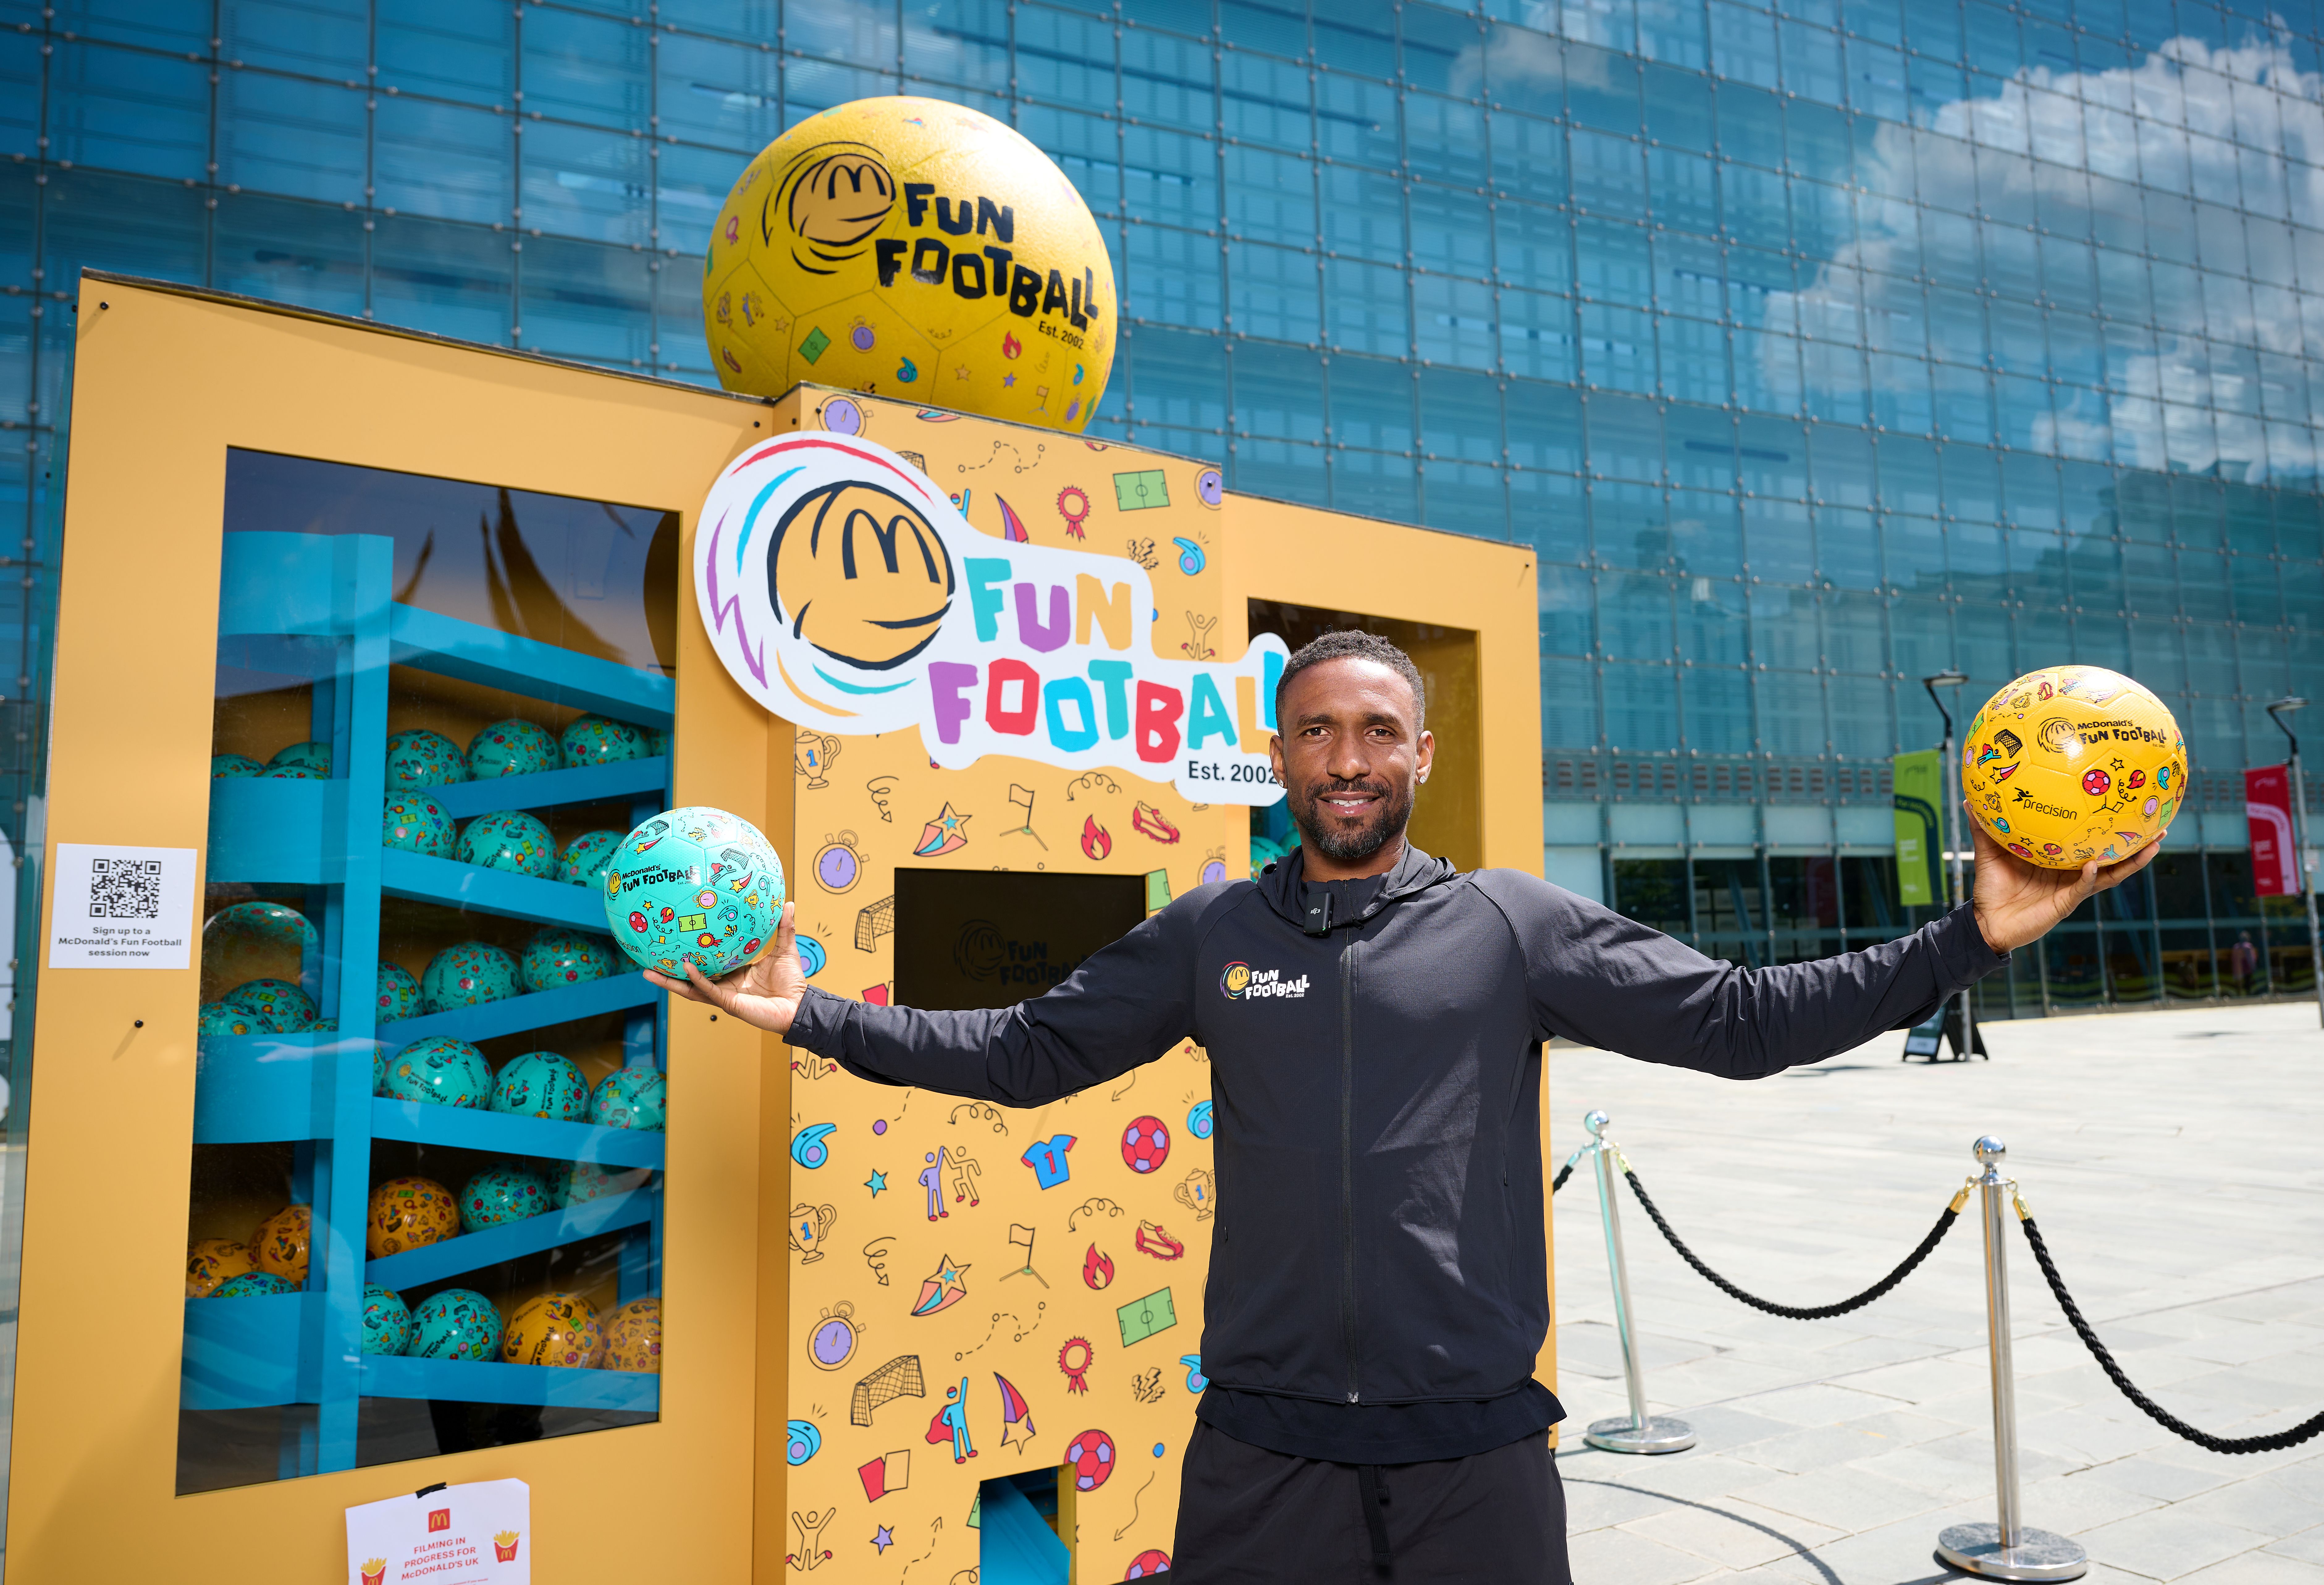 Jermain Defoe at a McDonald's Fun Football event outside the National football Museum in Manchester